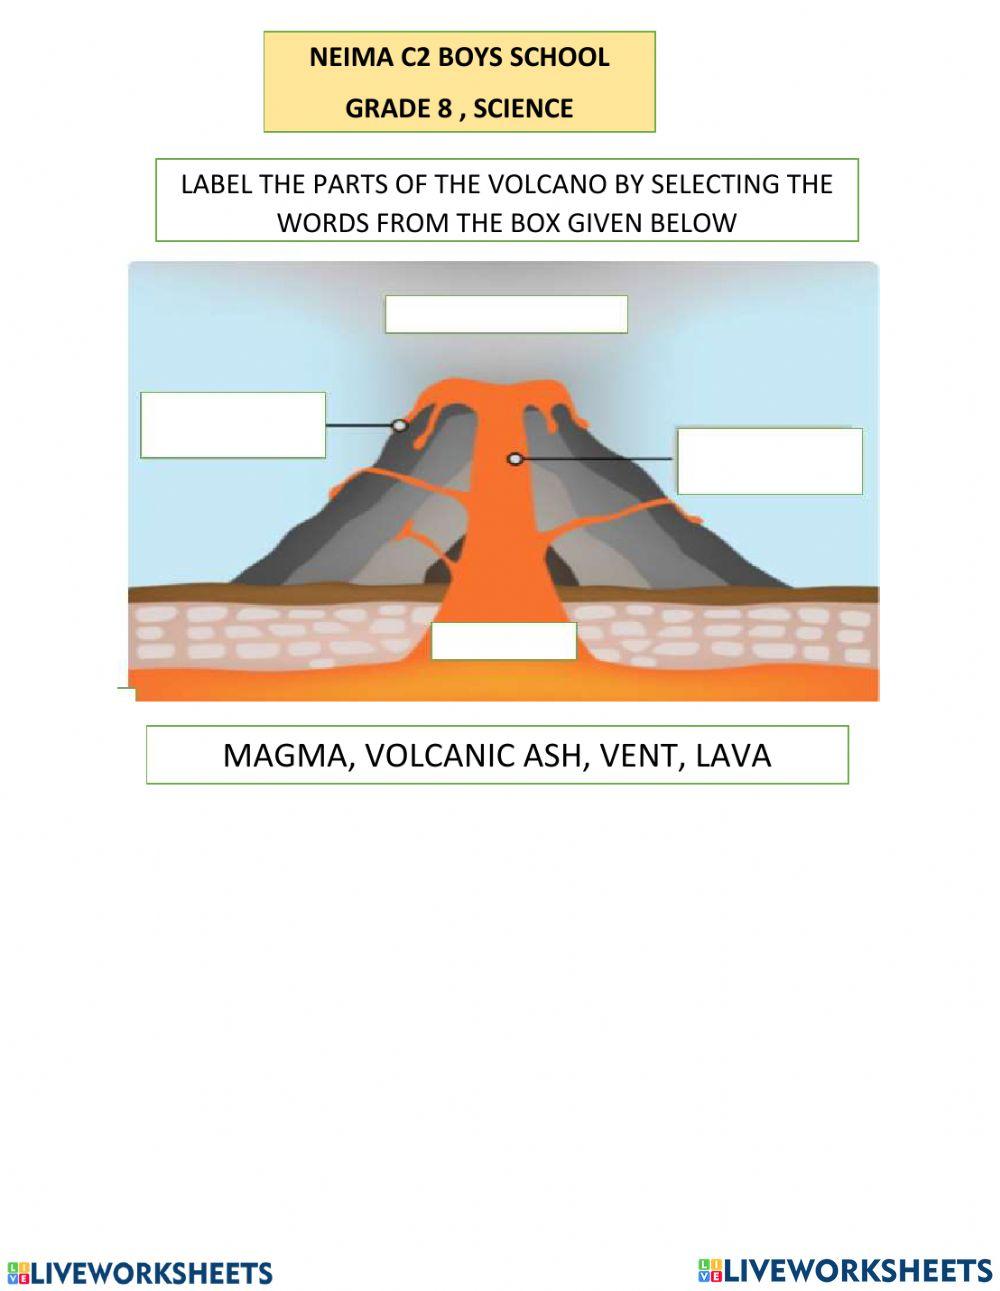 Label the parts of the volcano